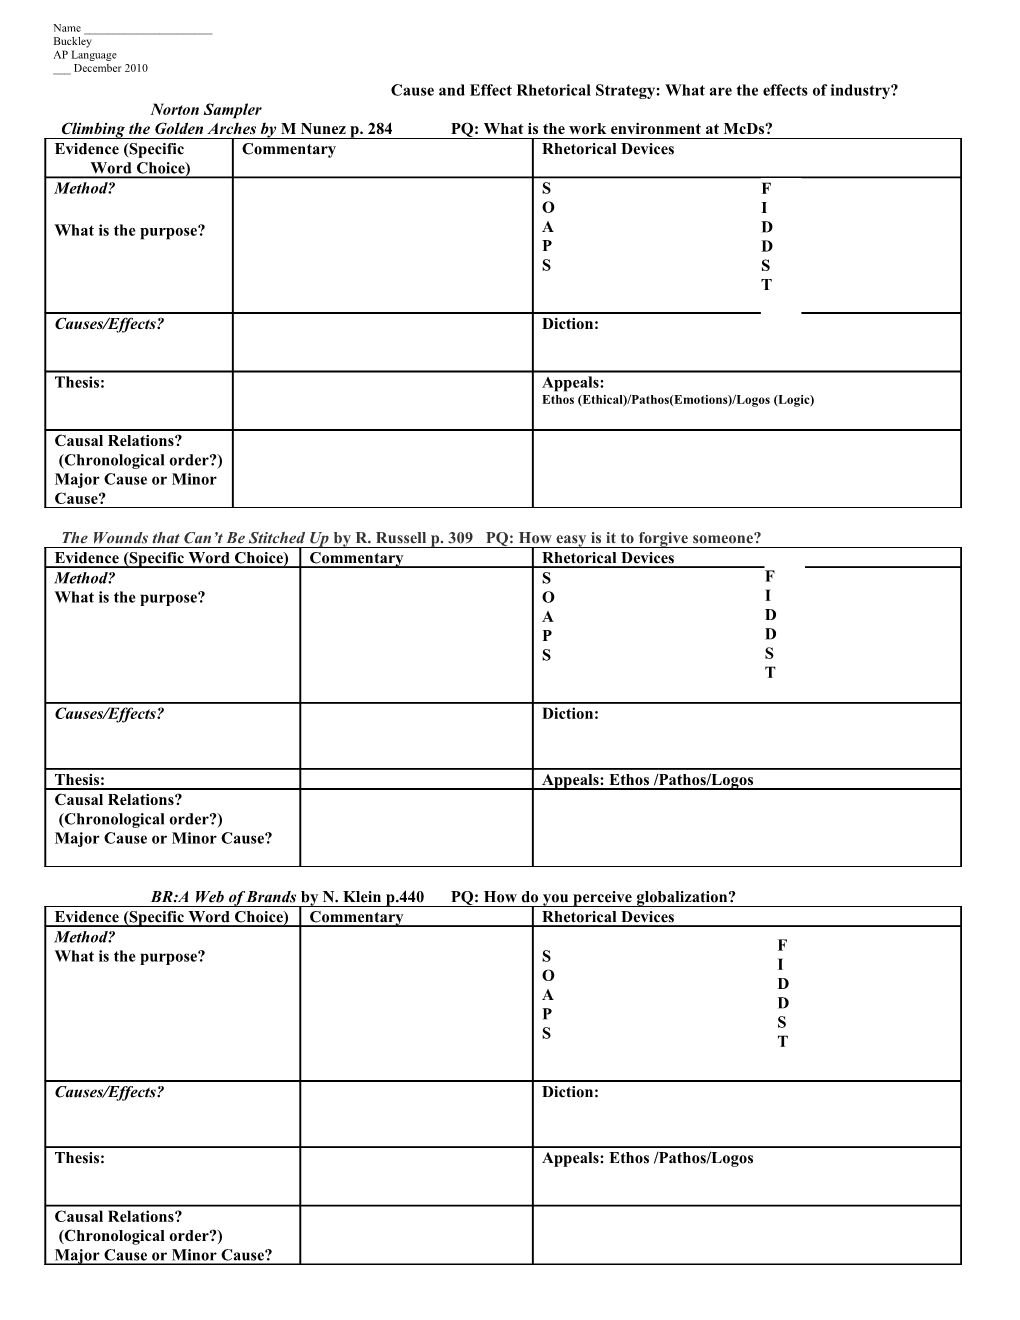 Cause and Effect Analysis Sheet